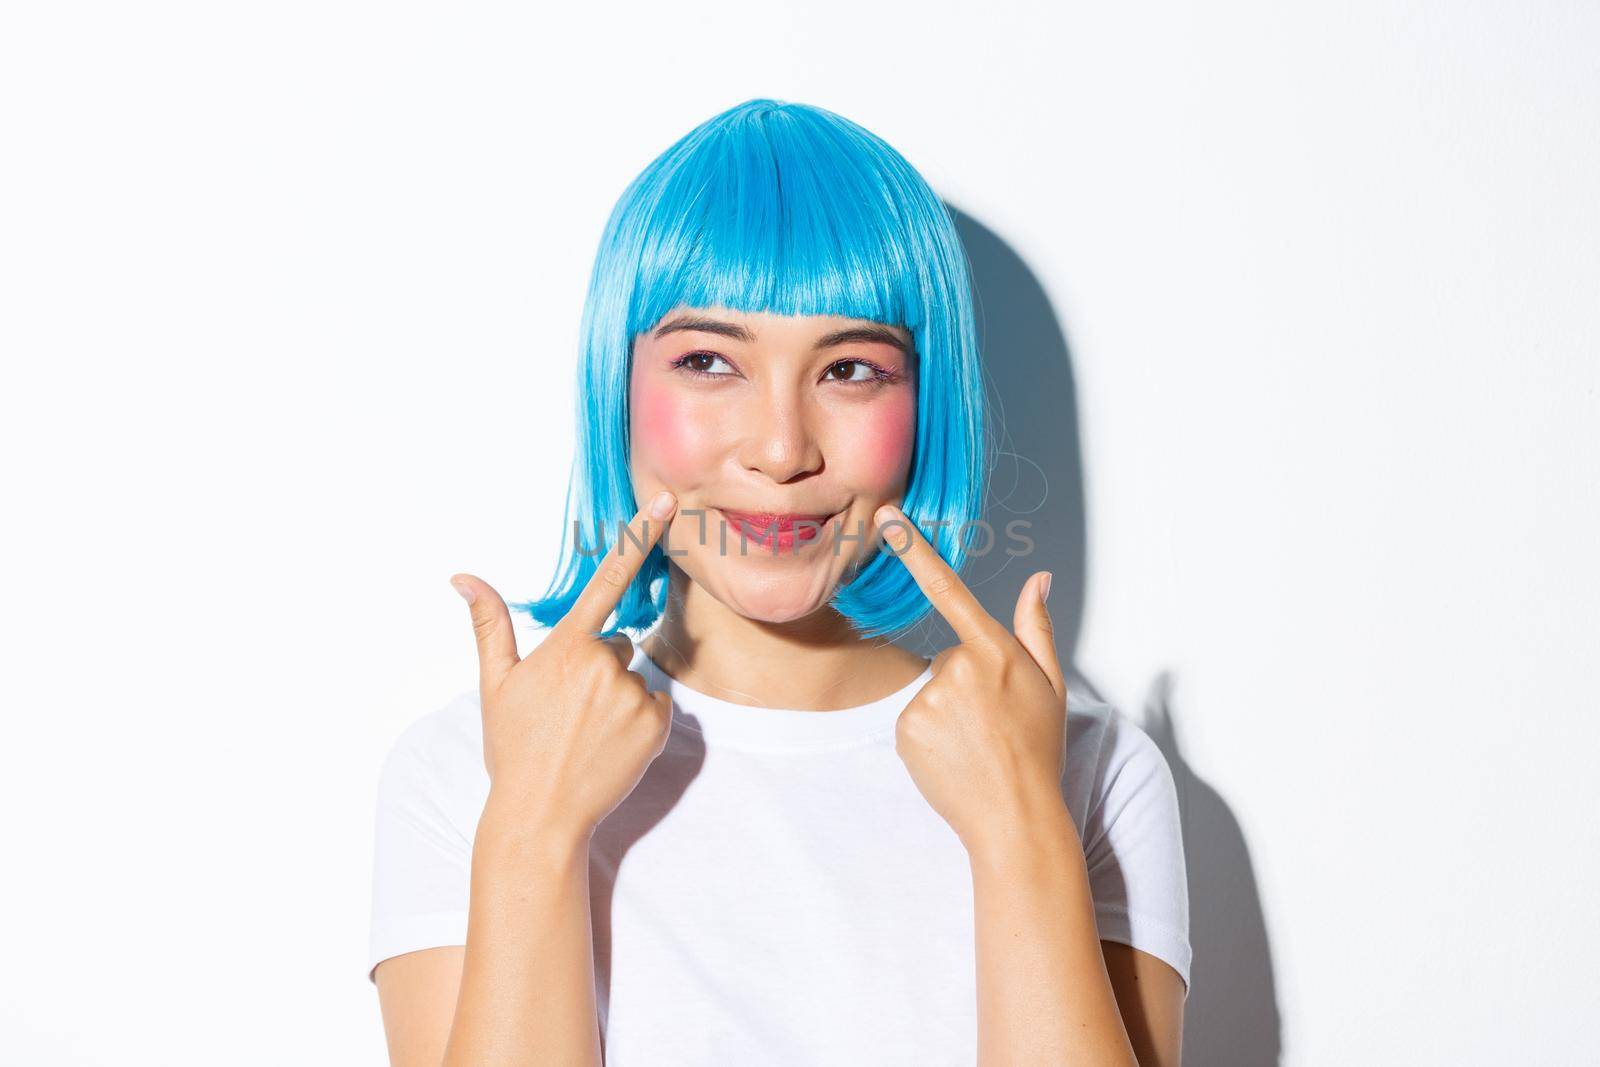 Image of adorable asian girl in blue wig poking her cheeks and looking upper left corner, standing over white background.